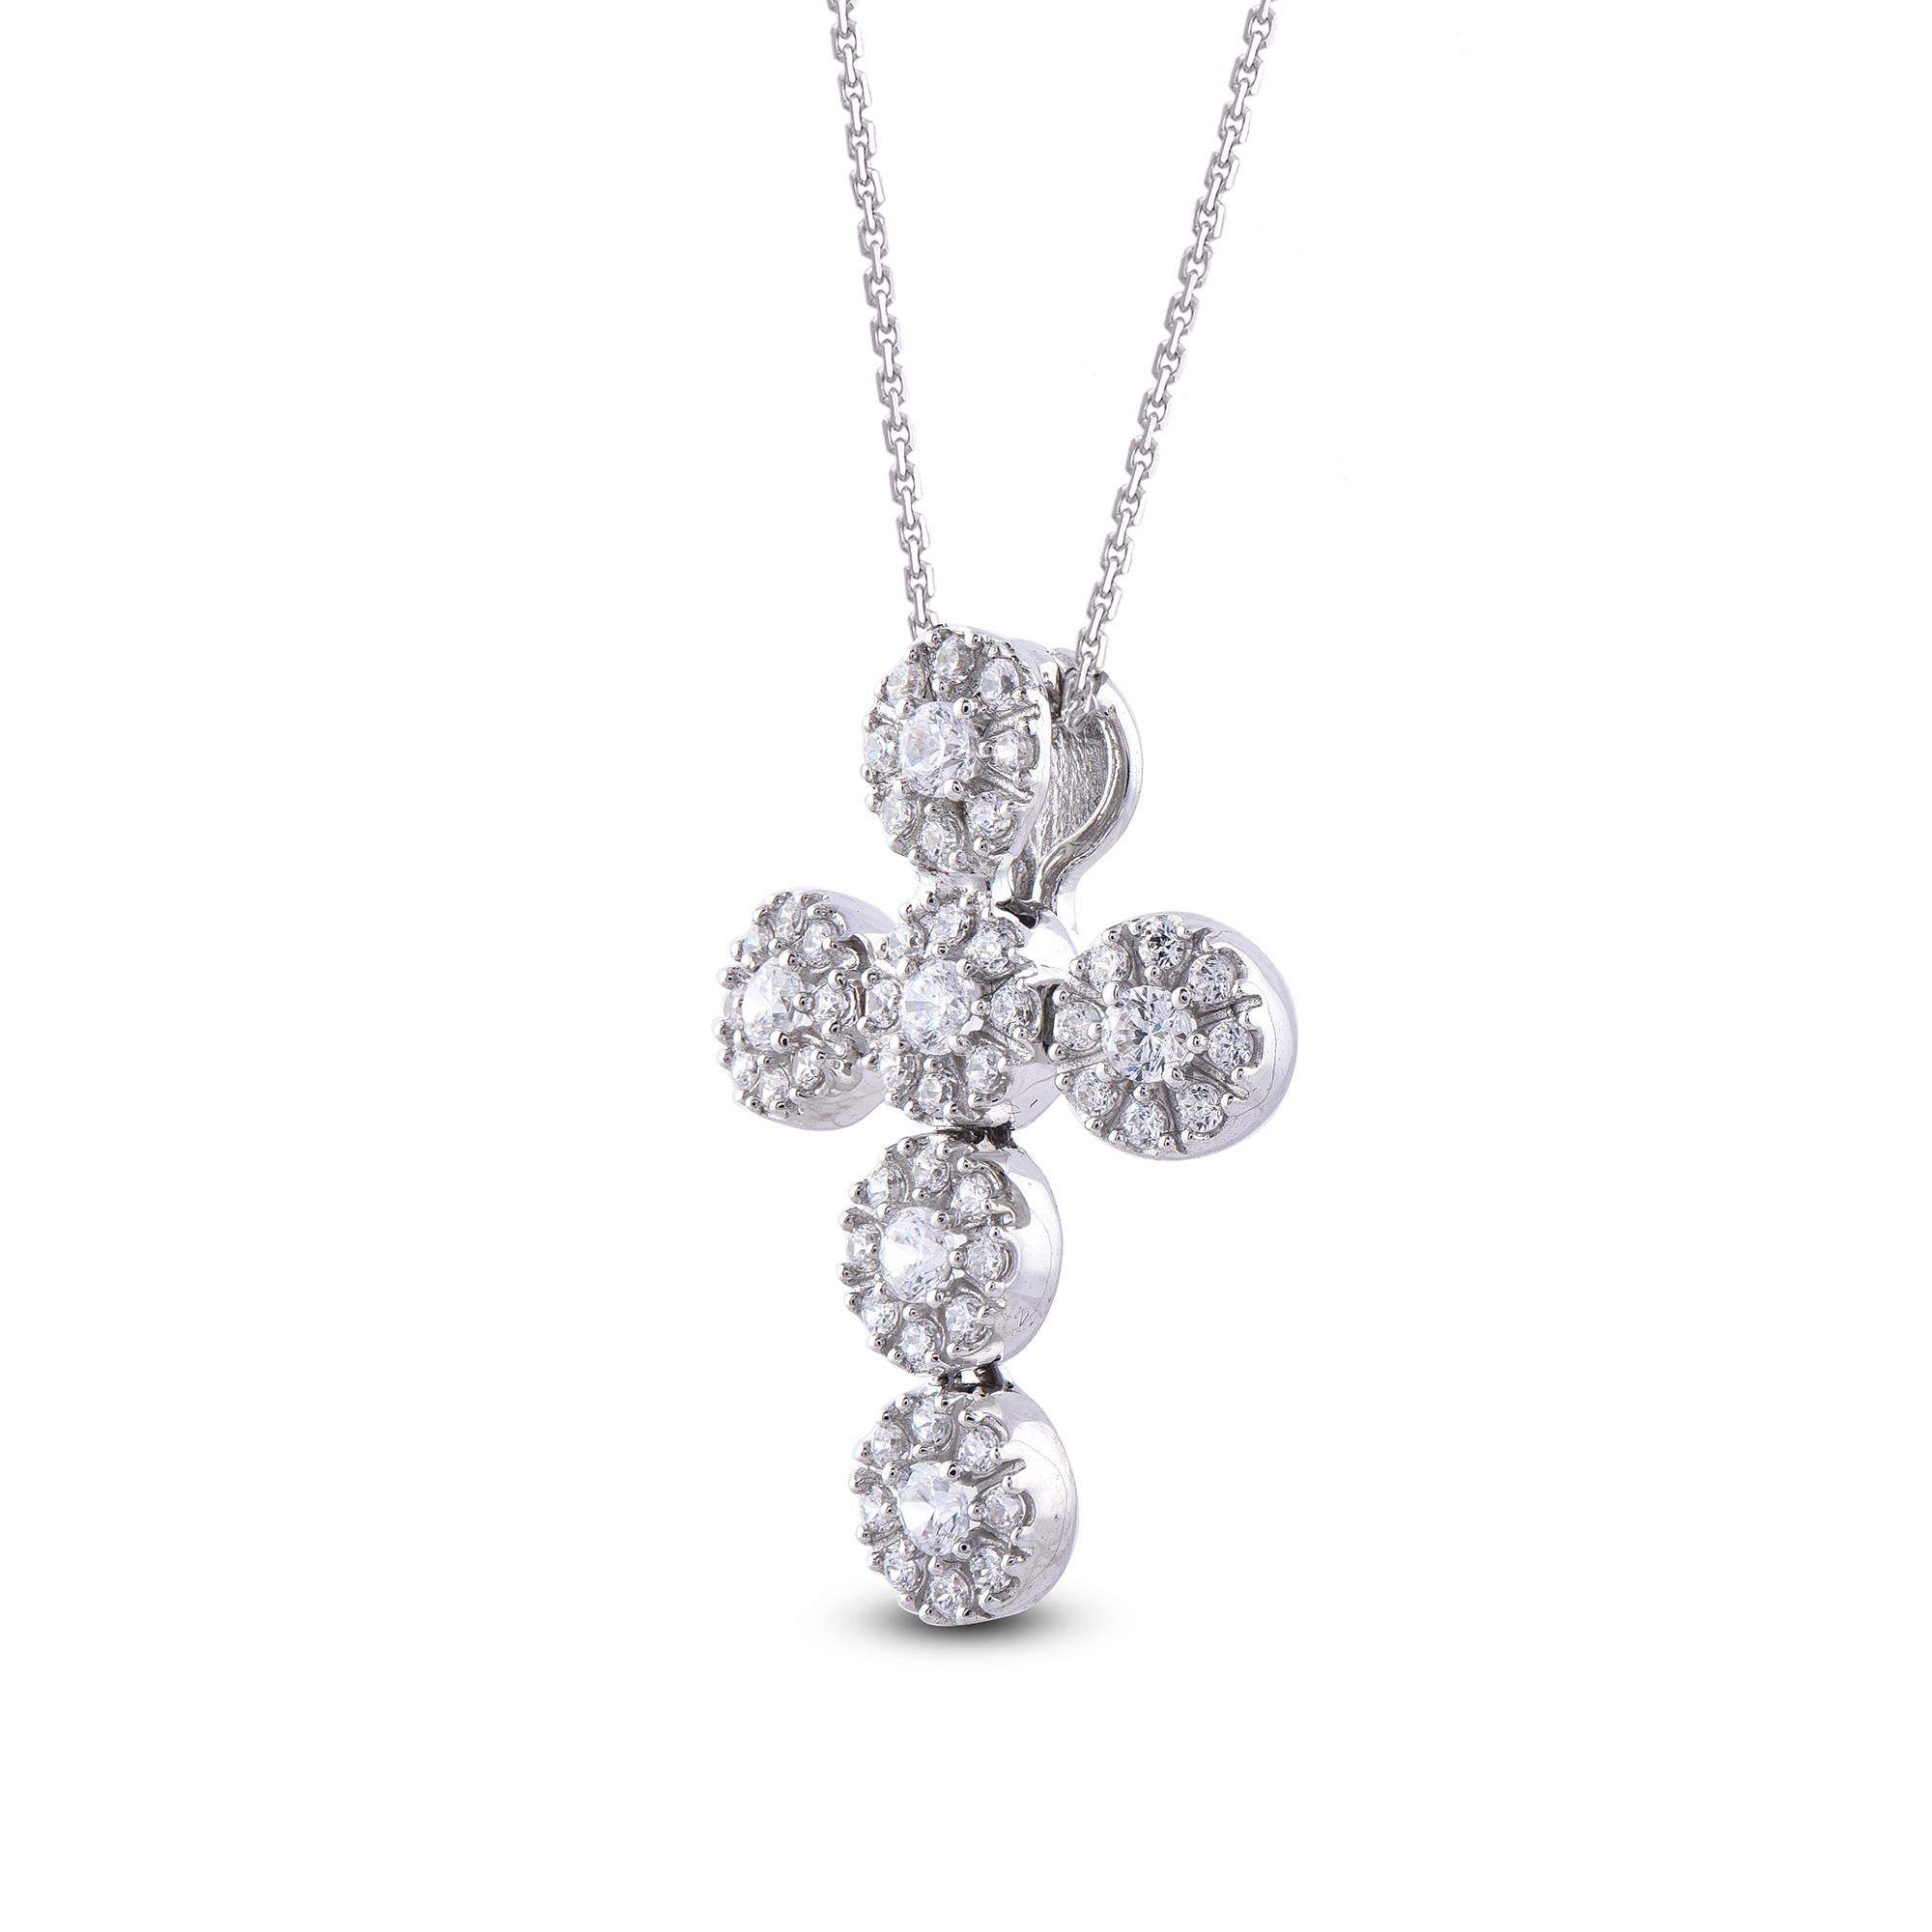 Faith and Fashion combine in this sparkling diamond cross pendant. The pendant is crafted from 14-karat gold  and features Round-54 round brilliant diamond set in Prong setting. A high polish finish complete the Brilliant sophistication of this